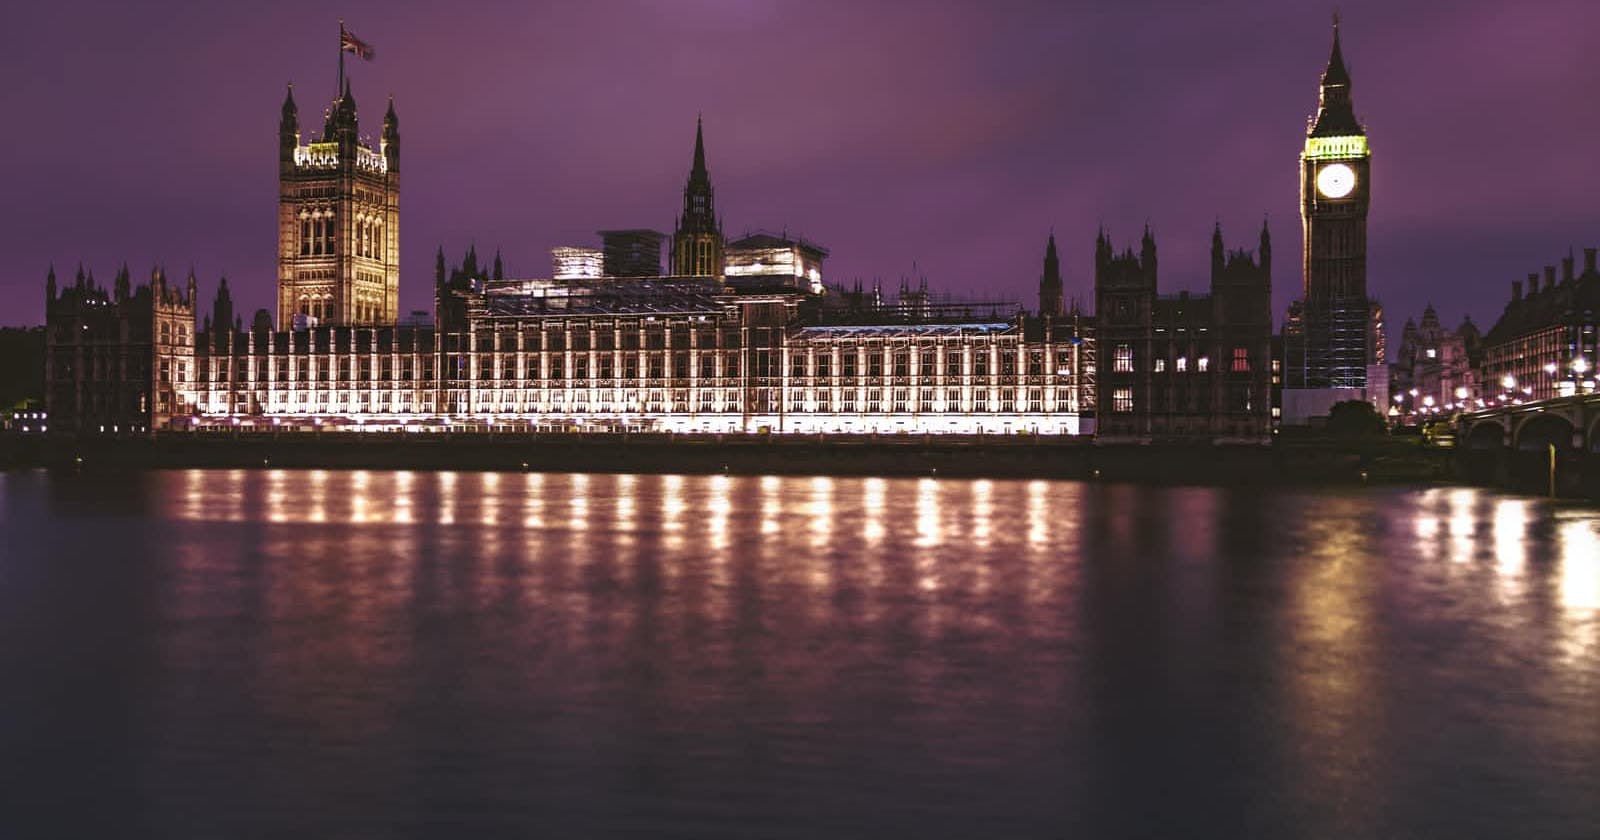 The House of Lords – A Bastion of Cronyism, Fat Cheque Books and Political Favours